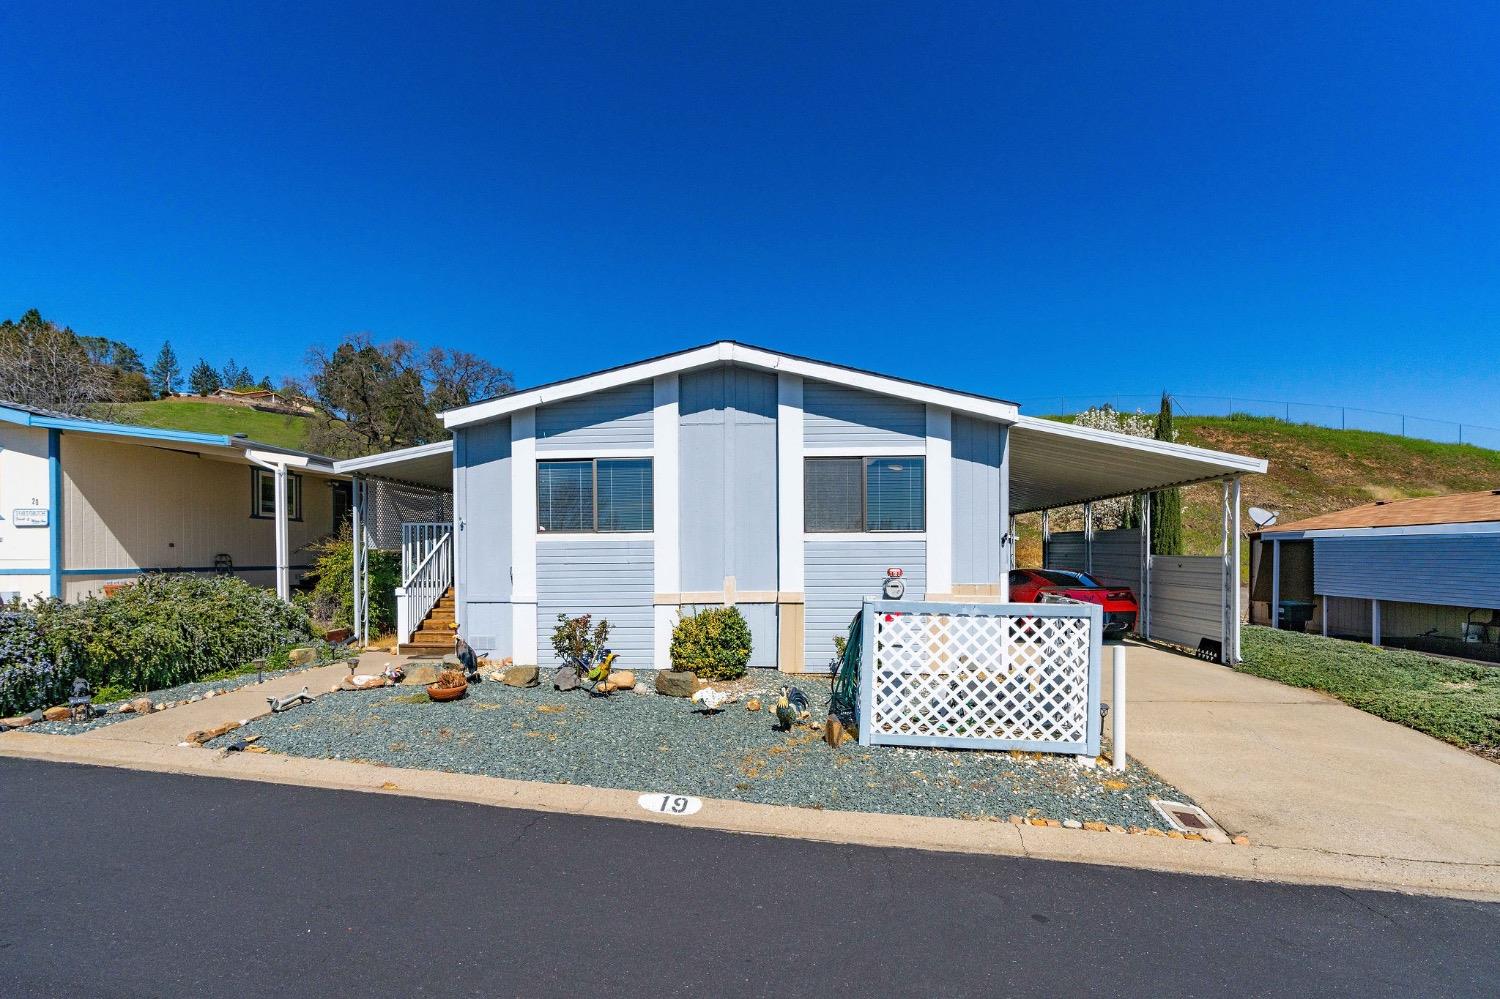 Photo of 20 Rollingwood Dr #19 in Jackson, CA